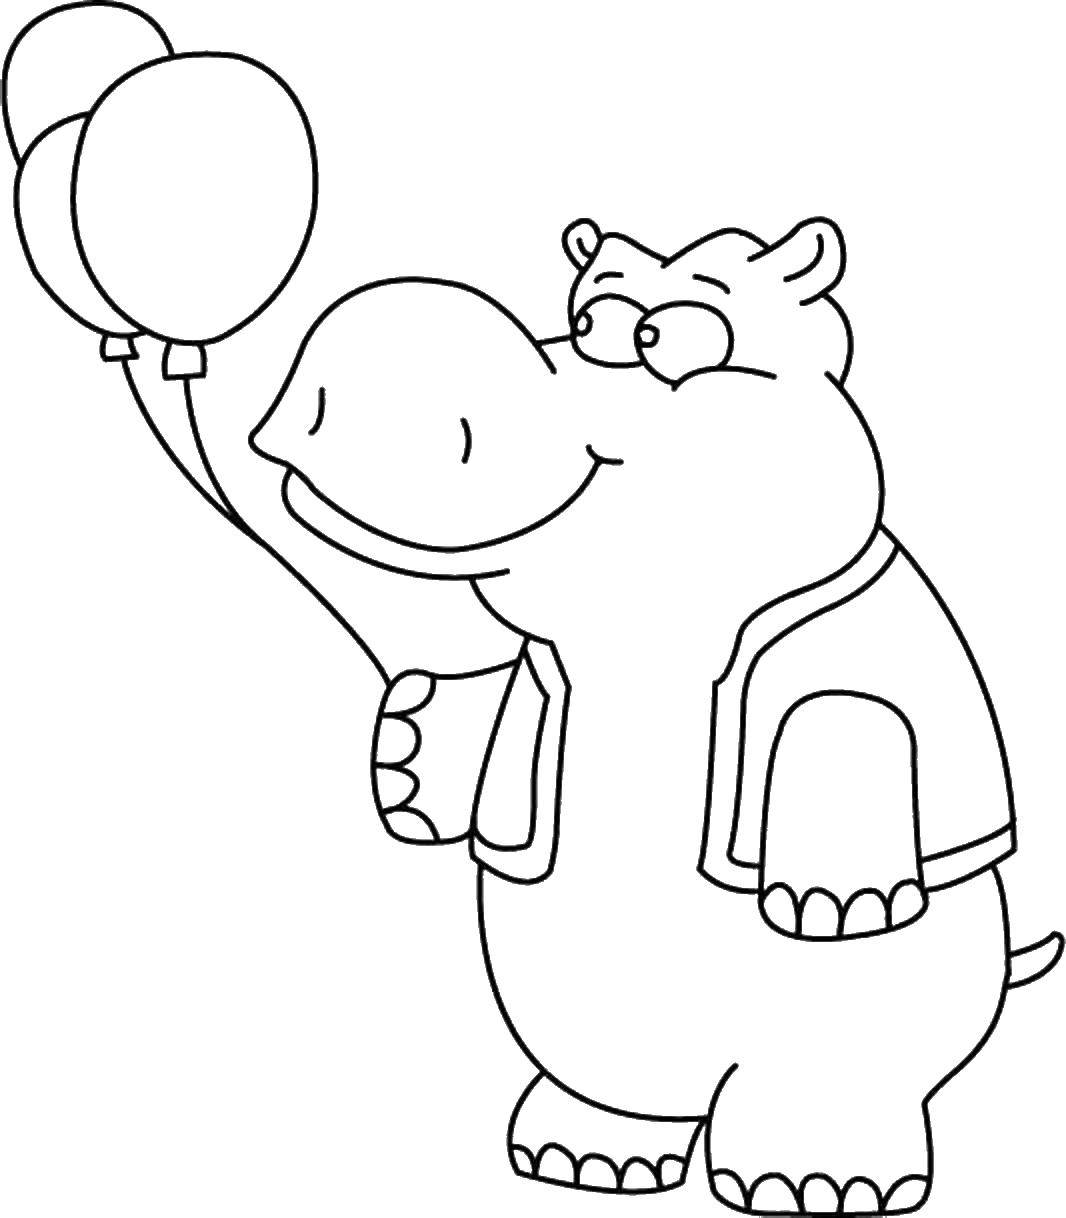 Coloring Hippo with balls. Category Animals. Tags:  Hippo.